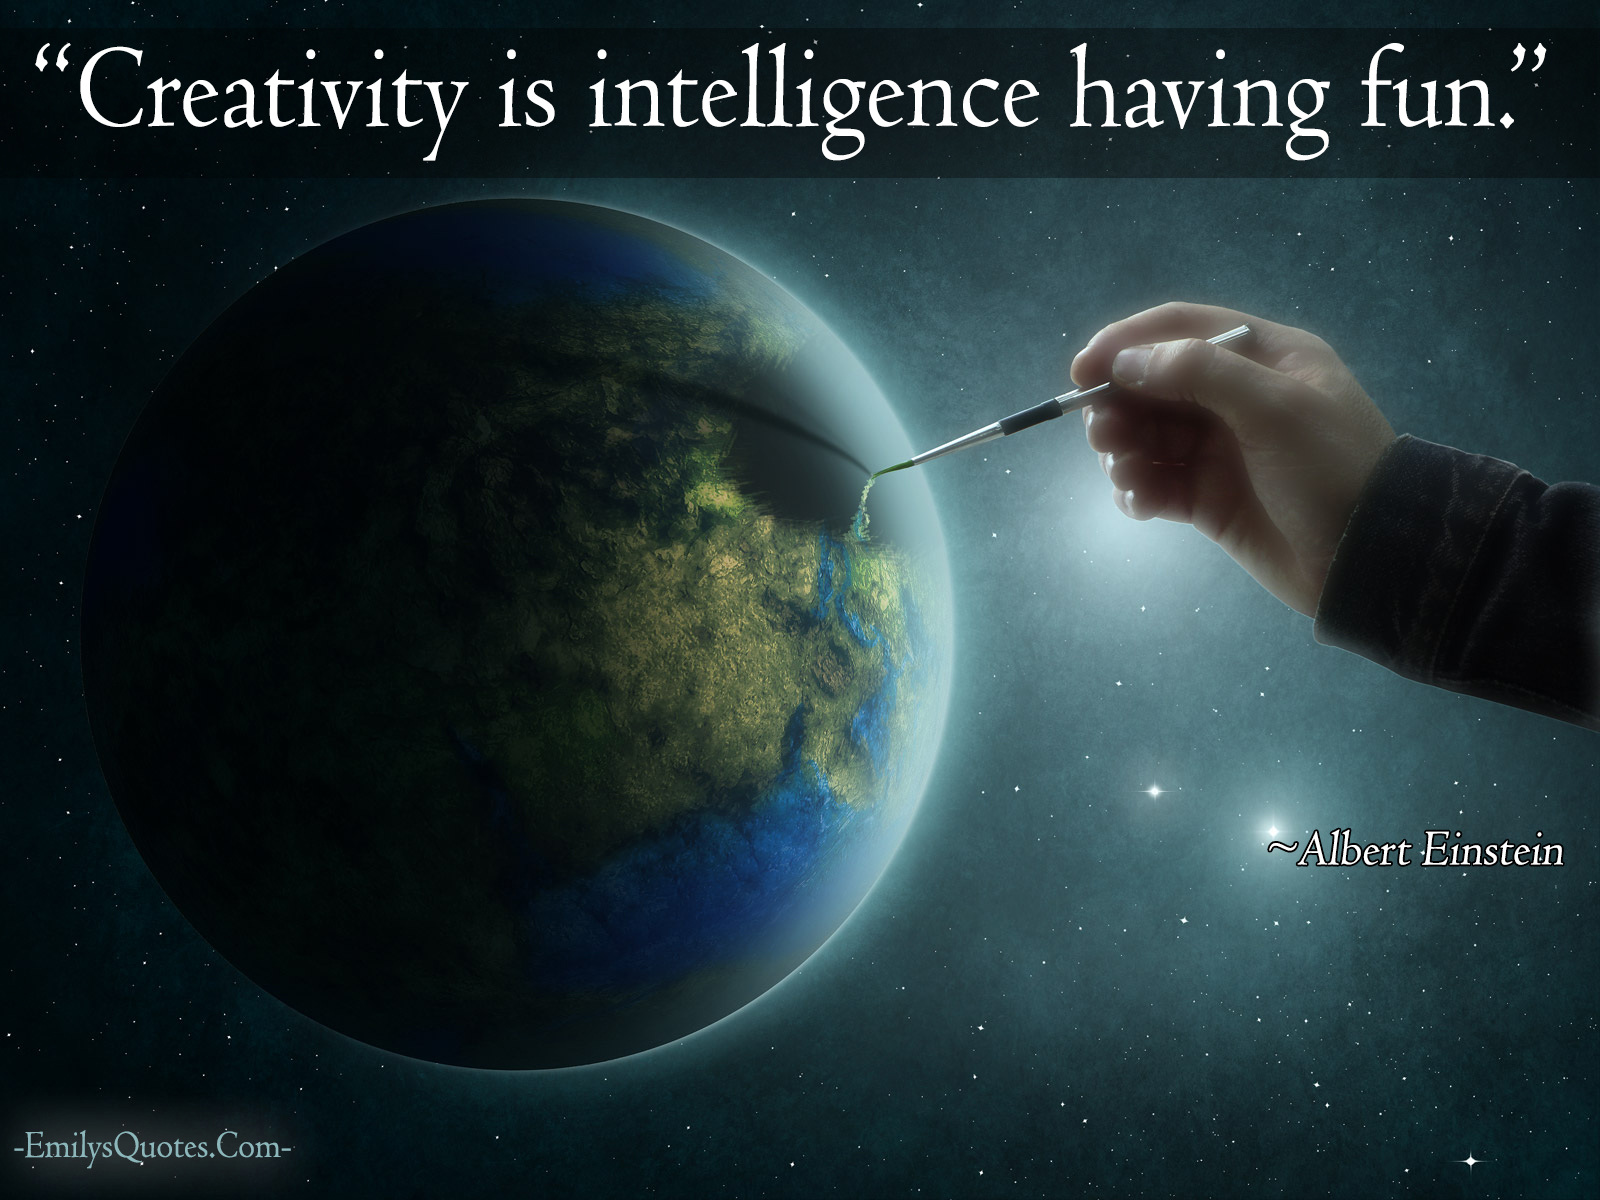 Image result for creativity is intelligence having fun